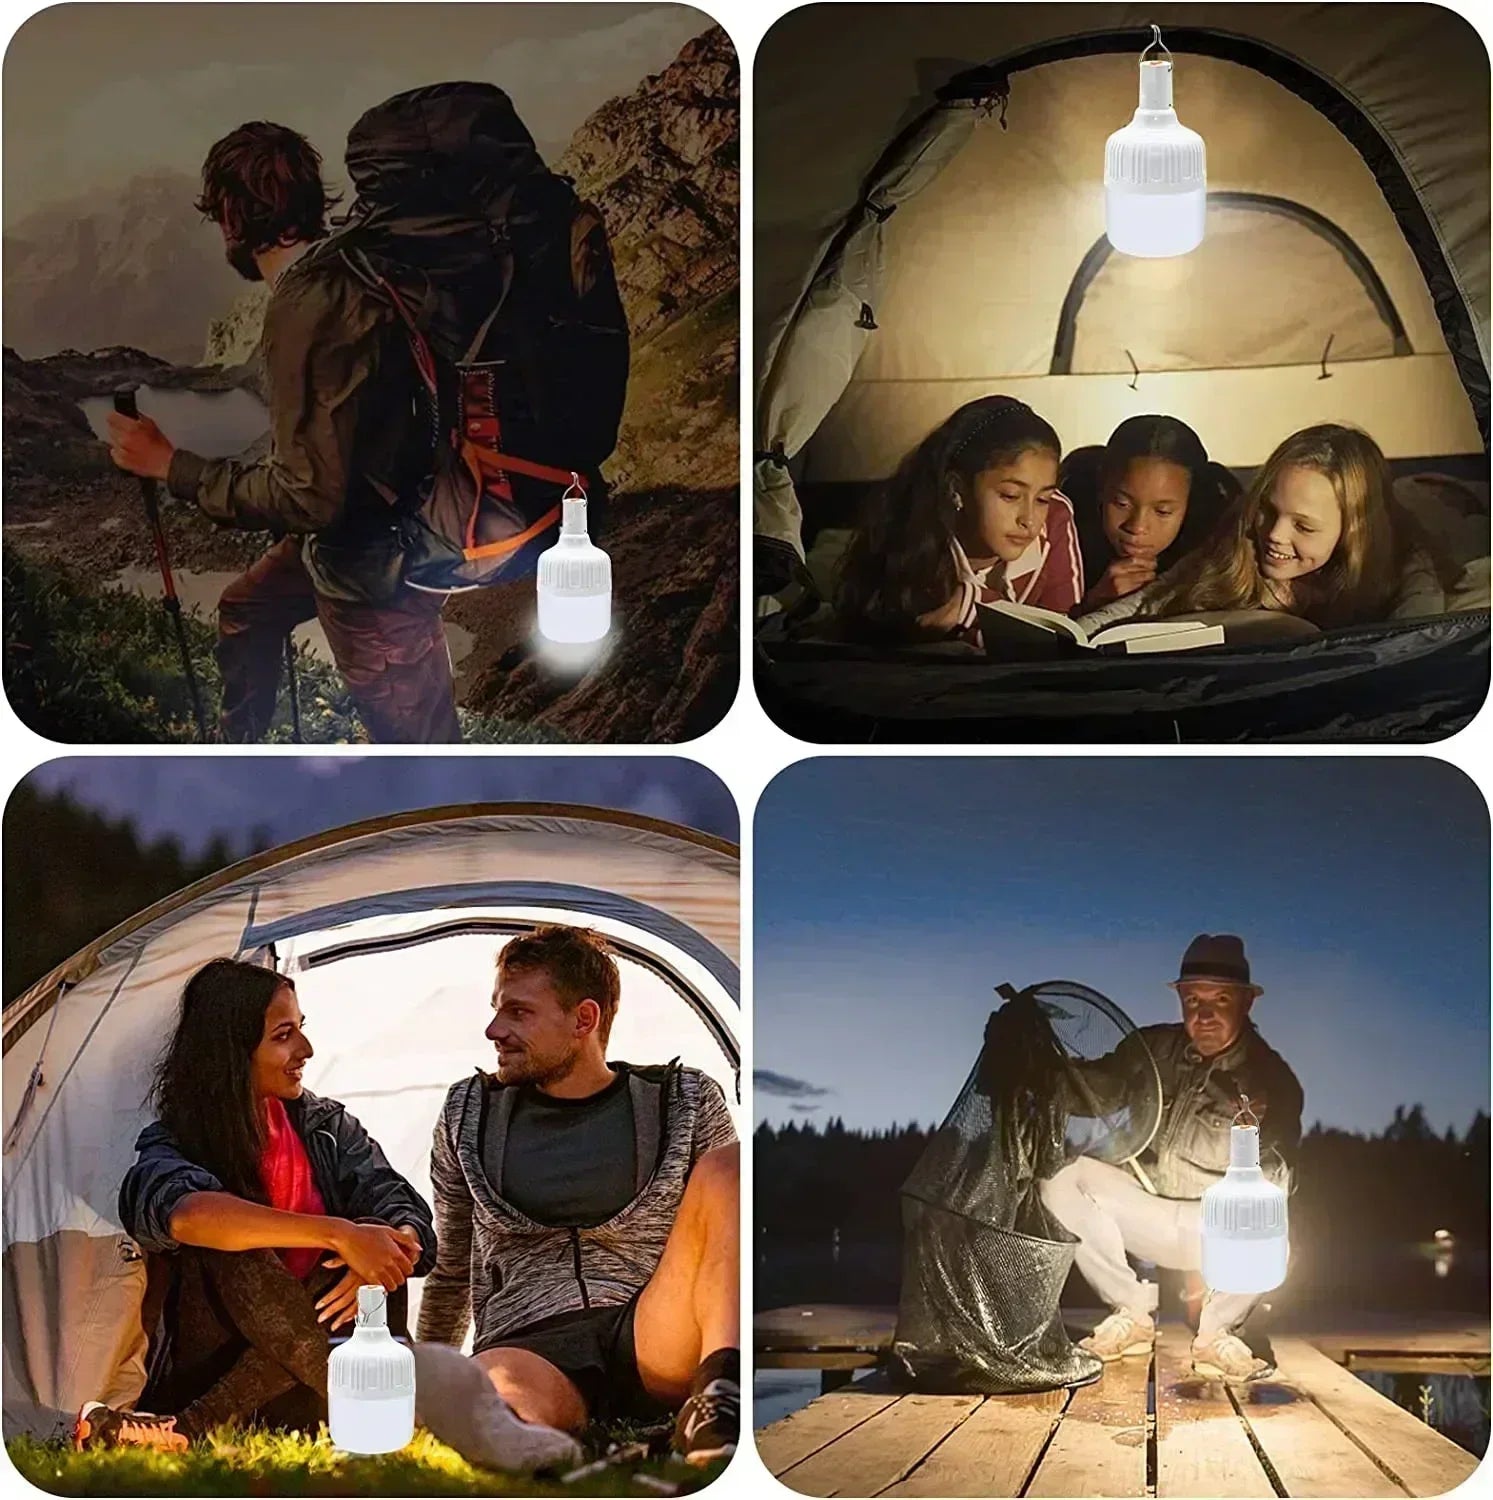 60W Outdoor Camping Light